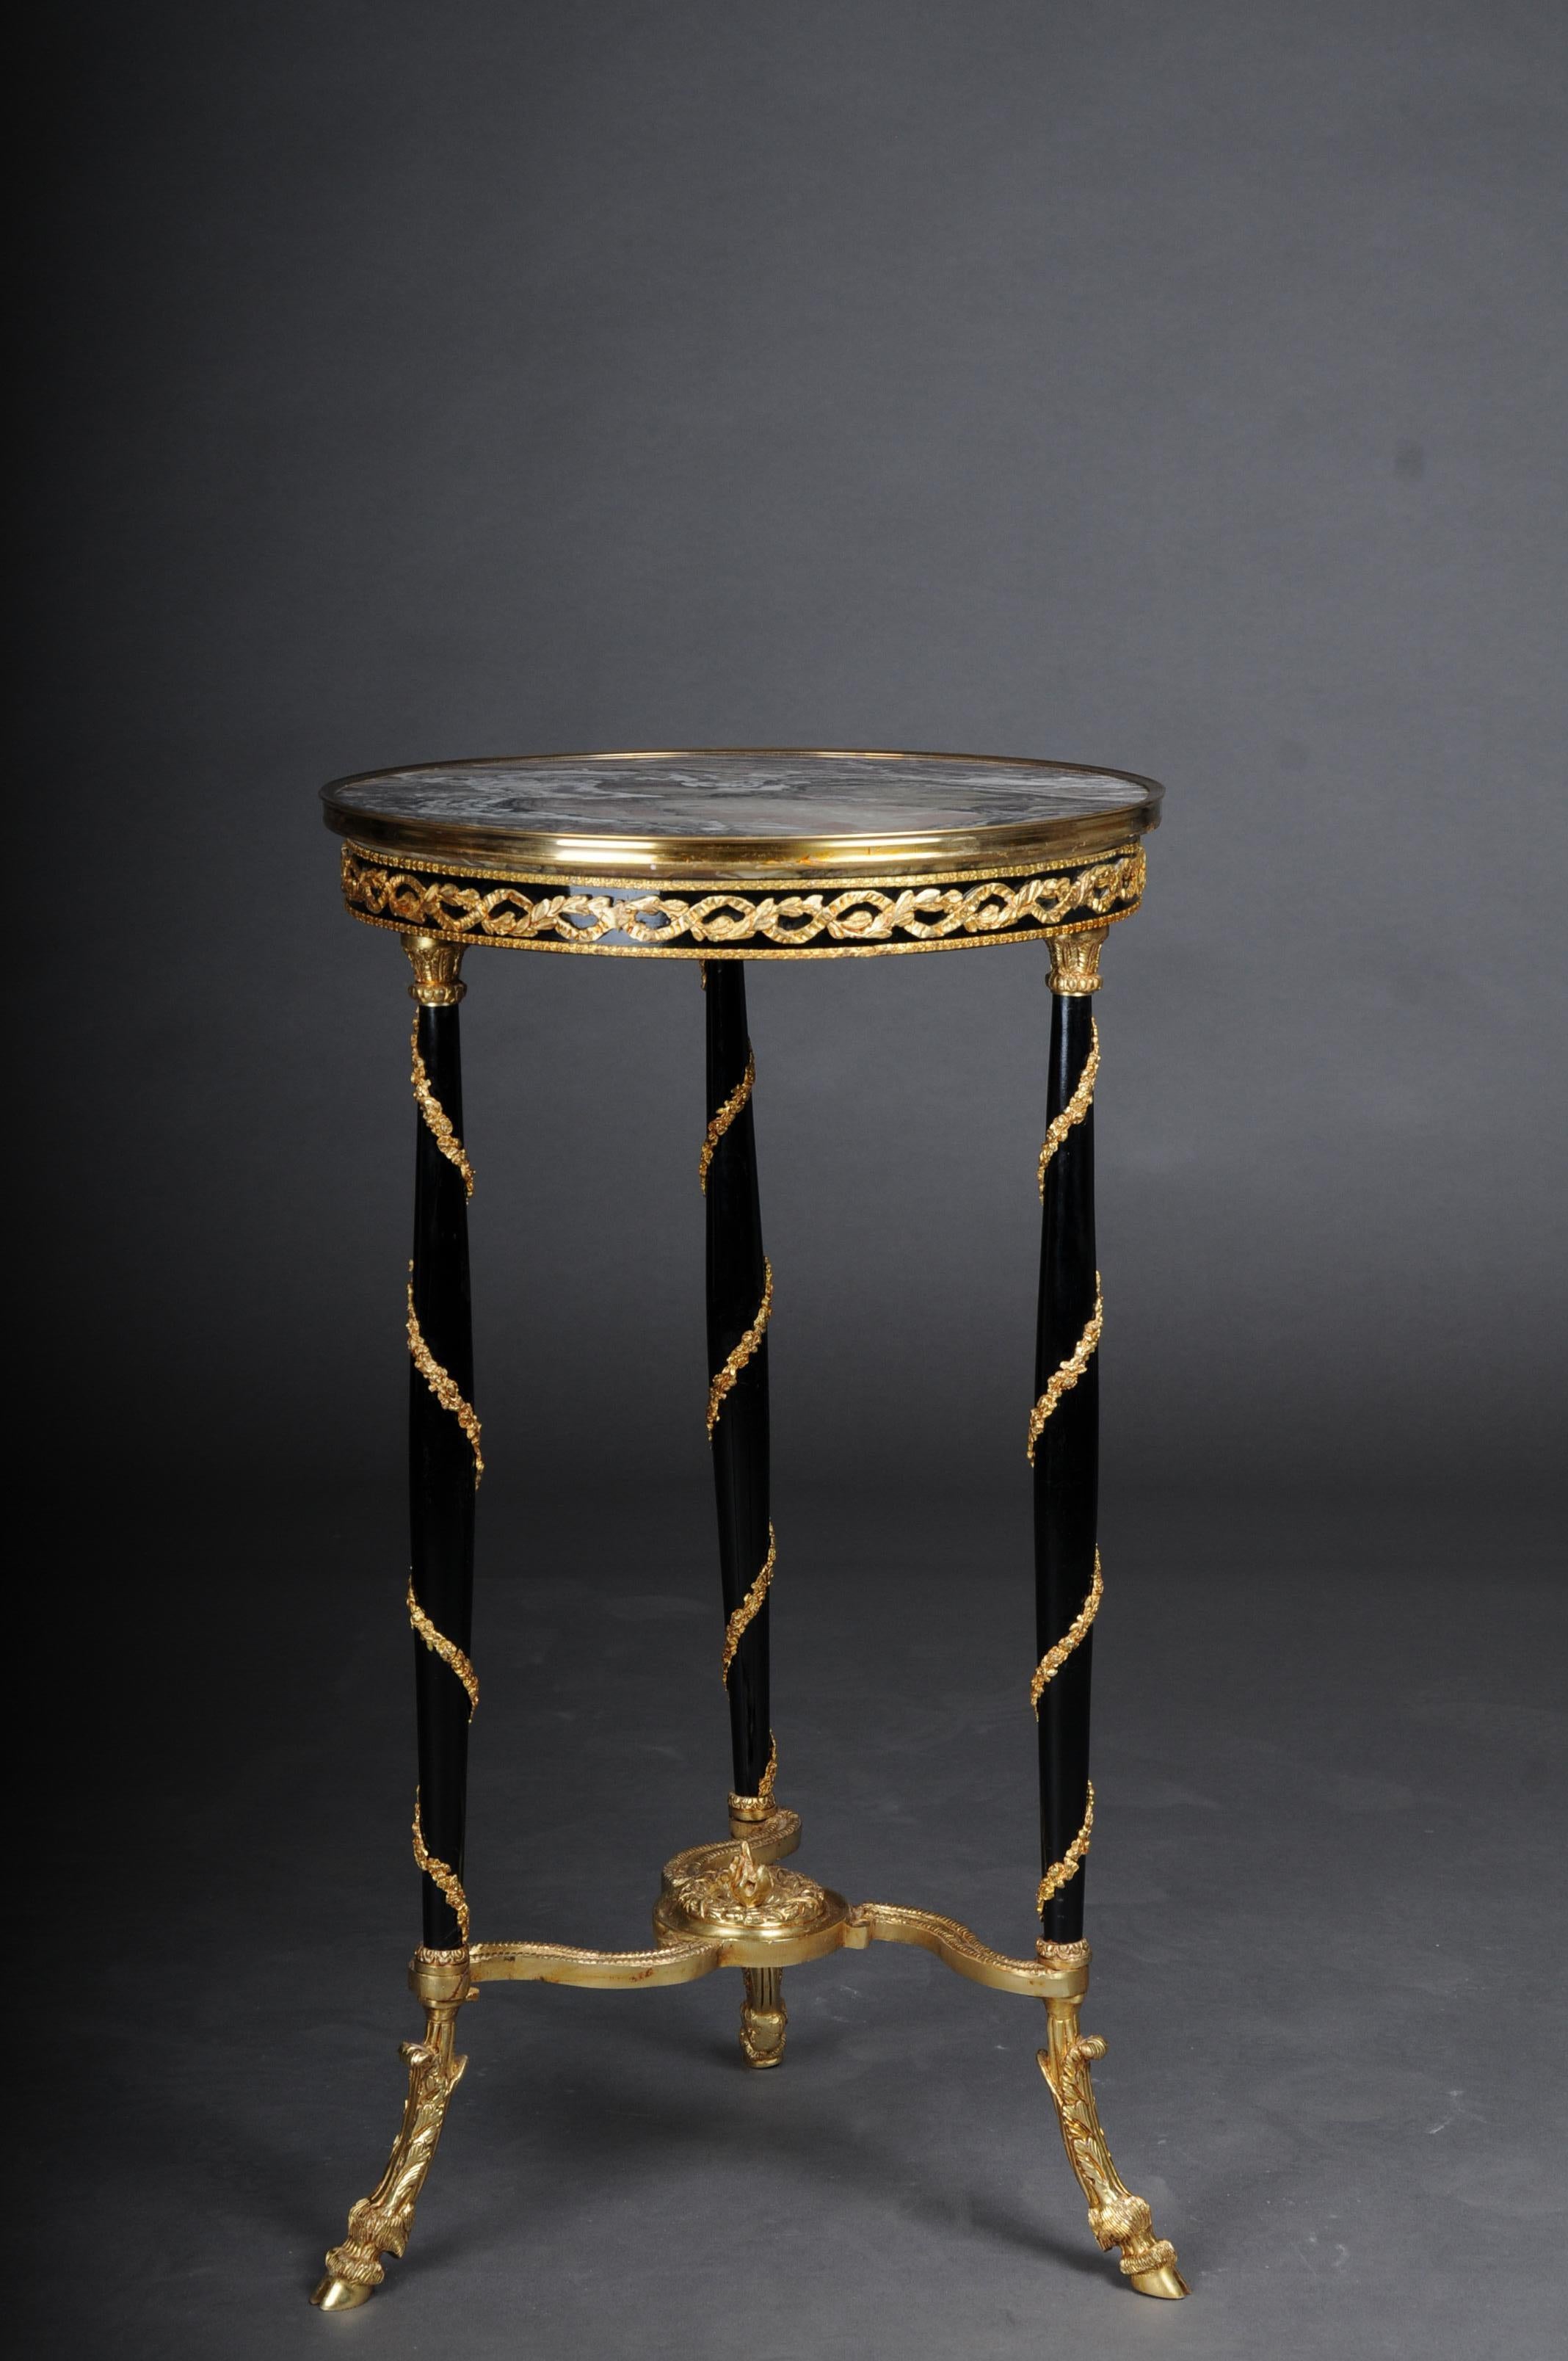 Beech 20th Century Majestic Empire Side Table/Gueridon, Marble, Round, Adam Weisweiler For Sale